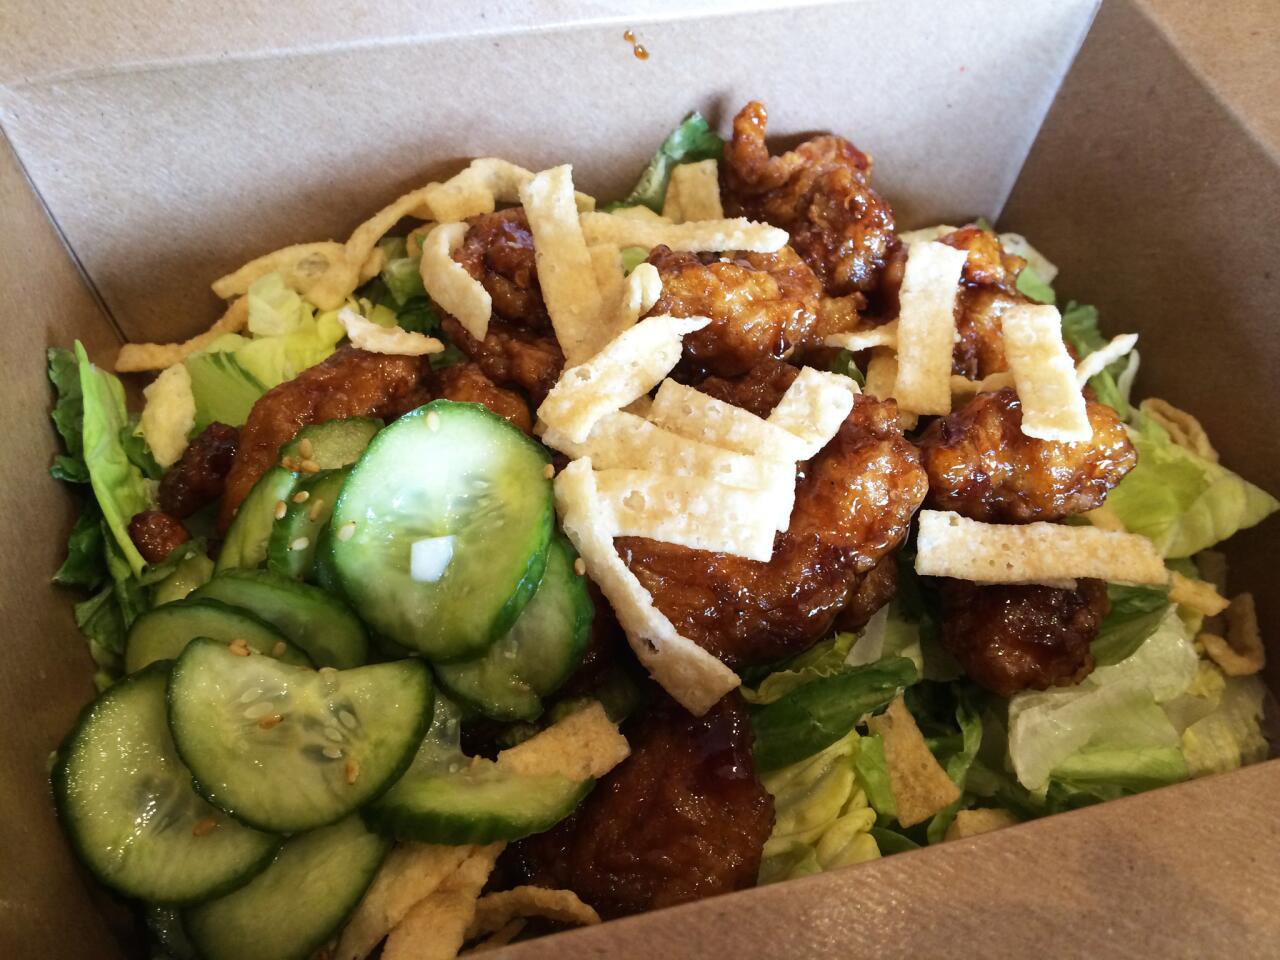 Orange chicken salad with pickled cucumbers, shallots, crispy wontons on lettuce with citrus vinaigrette.